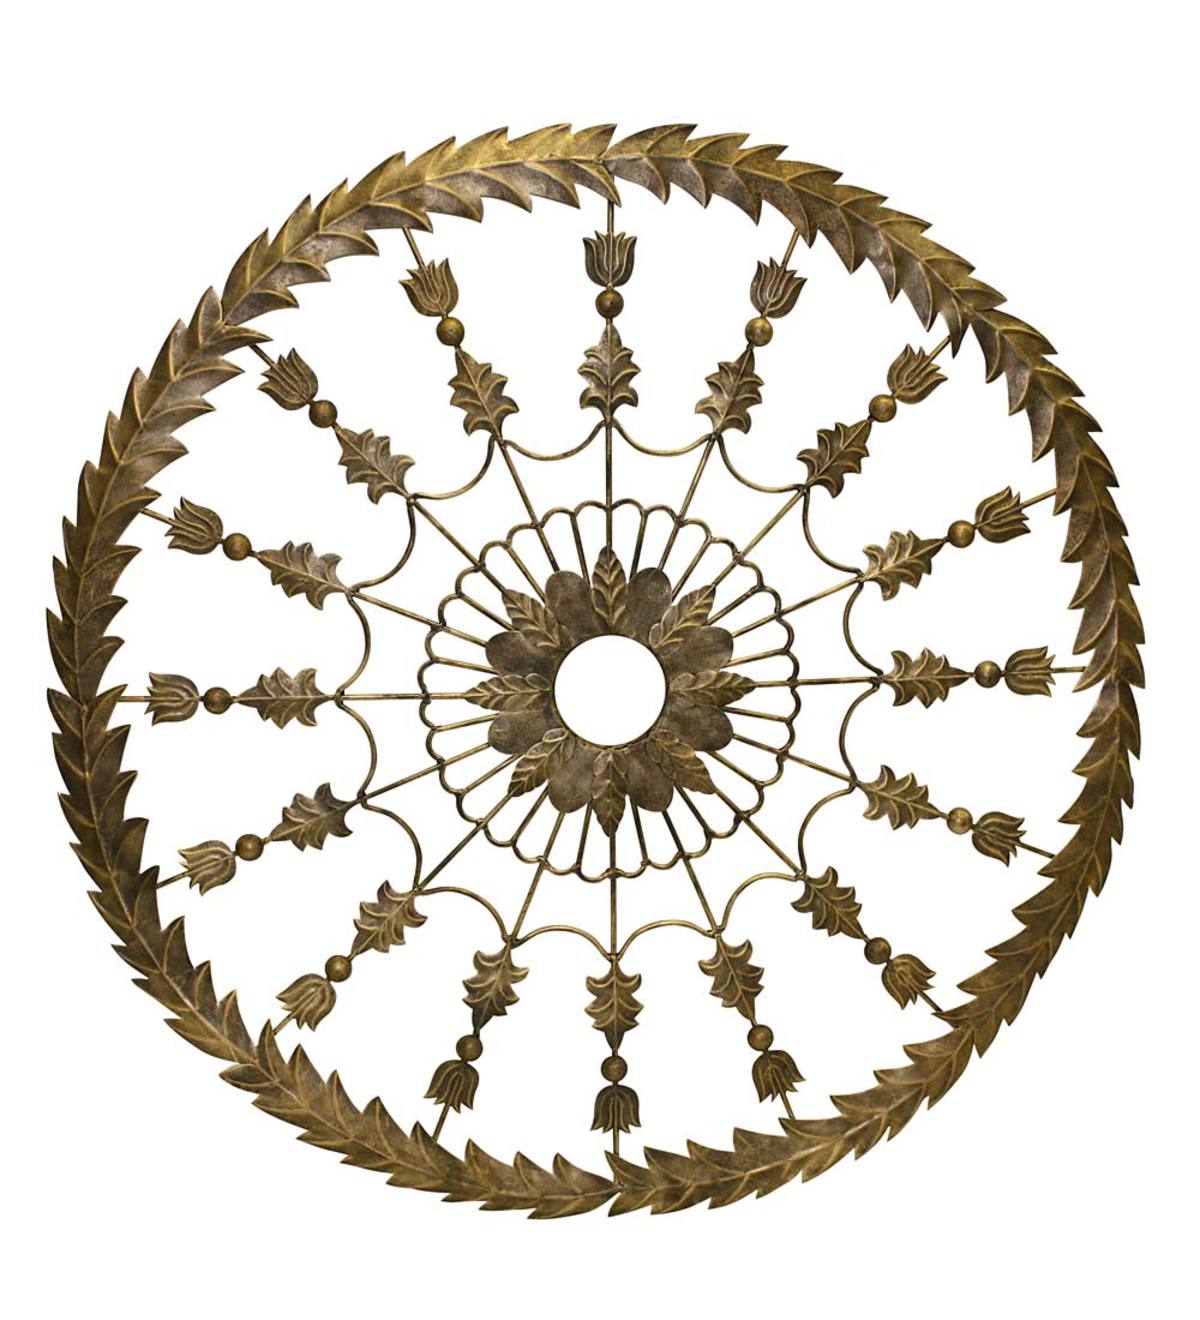 Gold-Colored Metal Ceiling Medallion